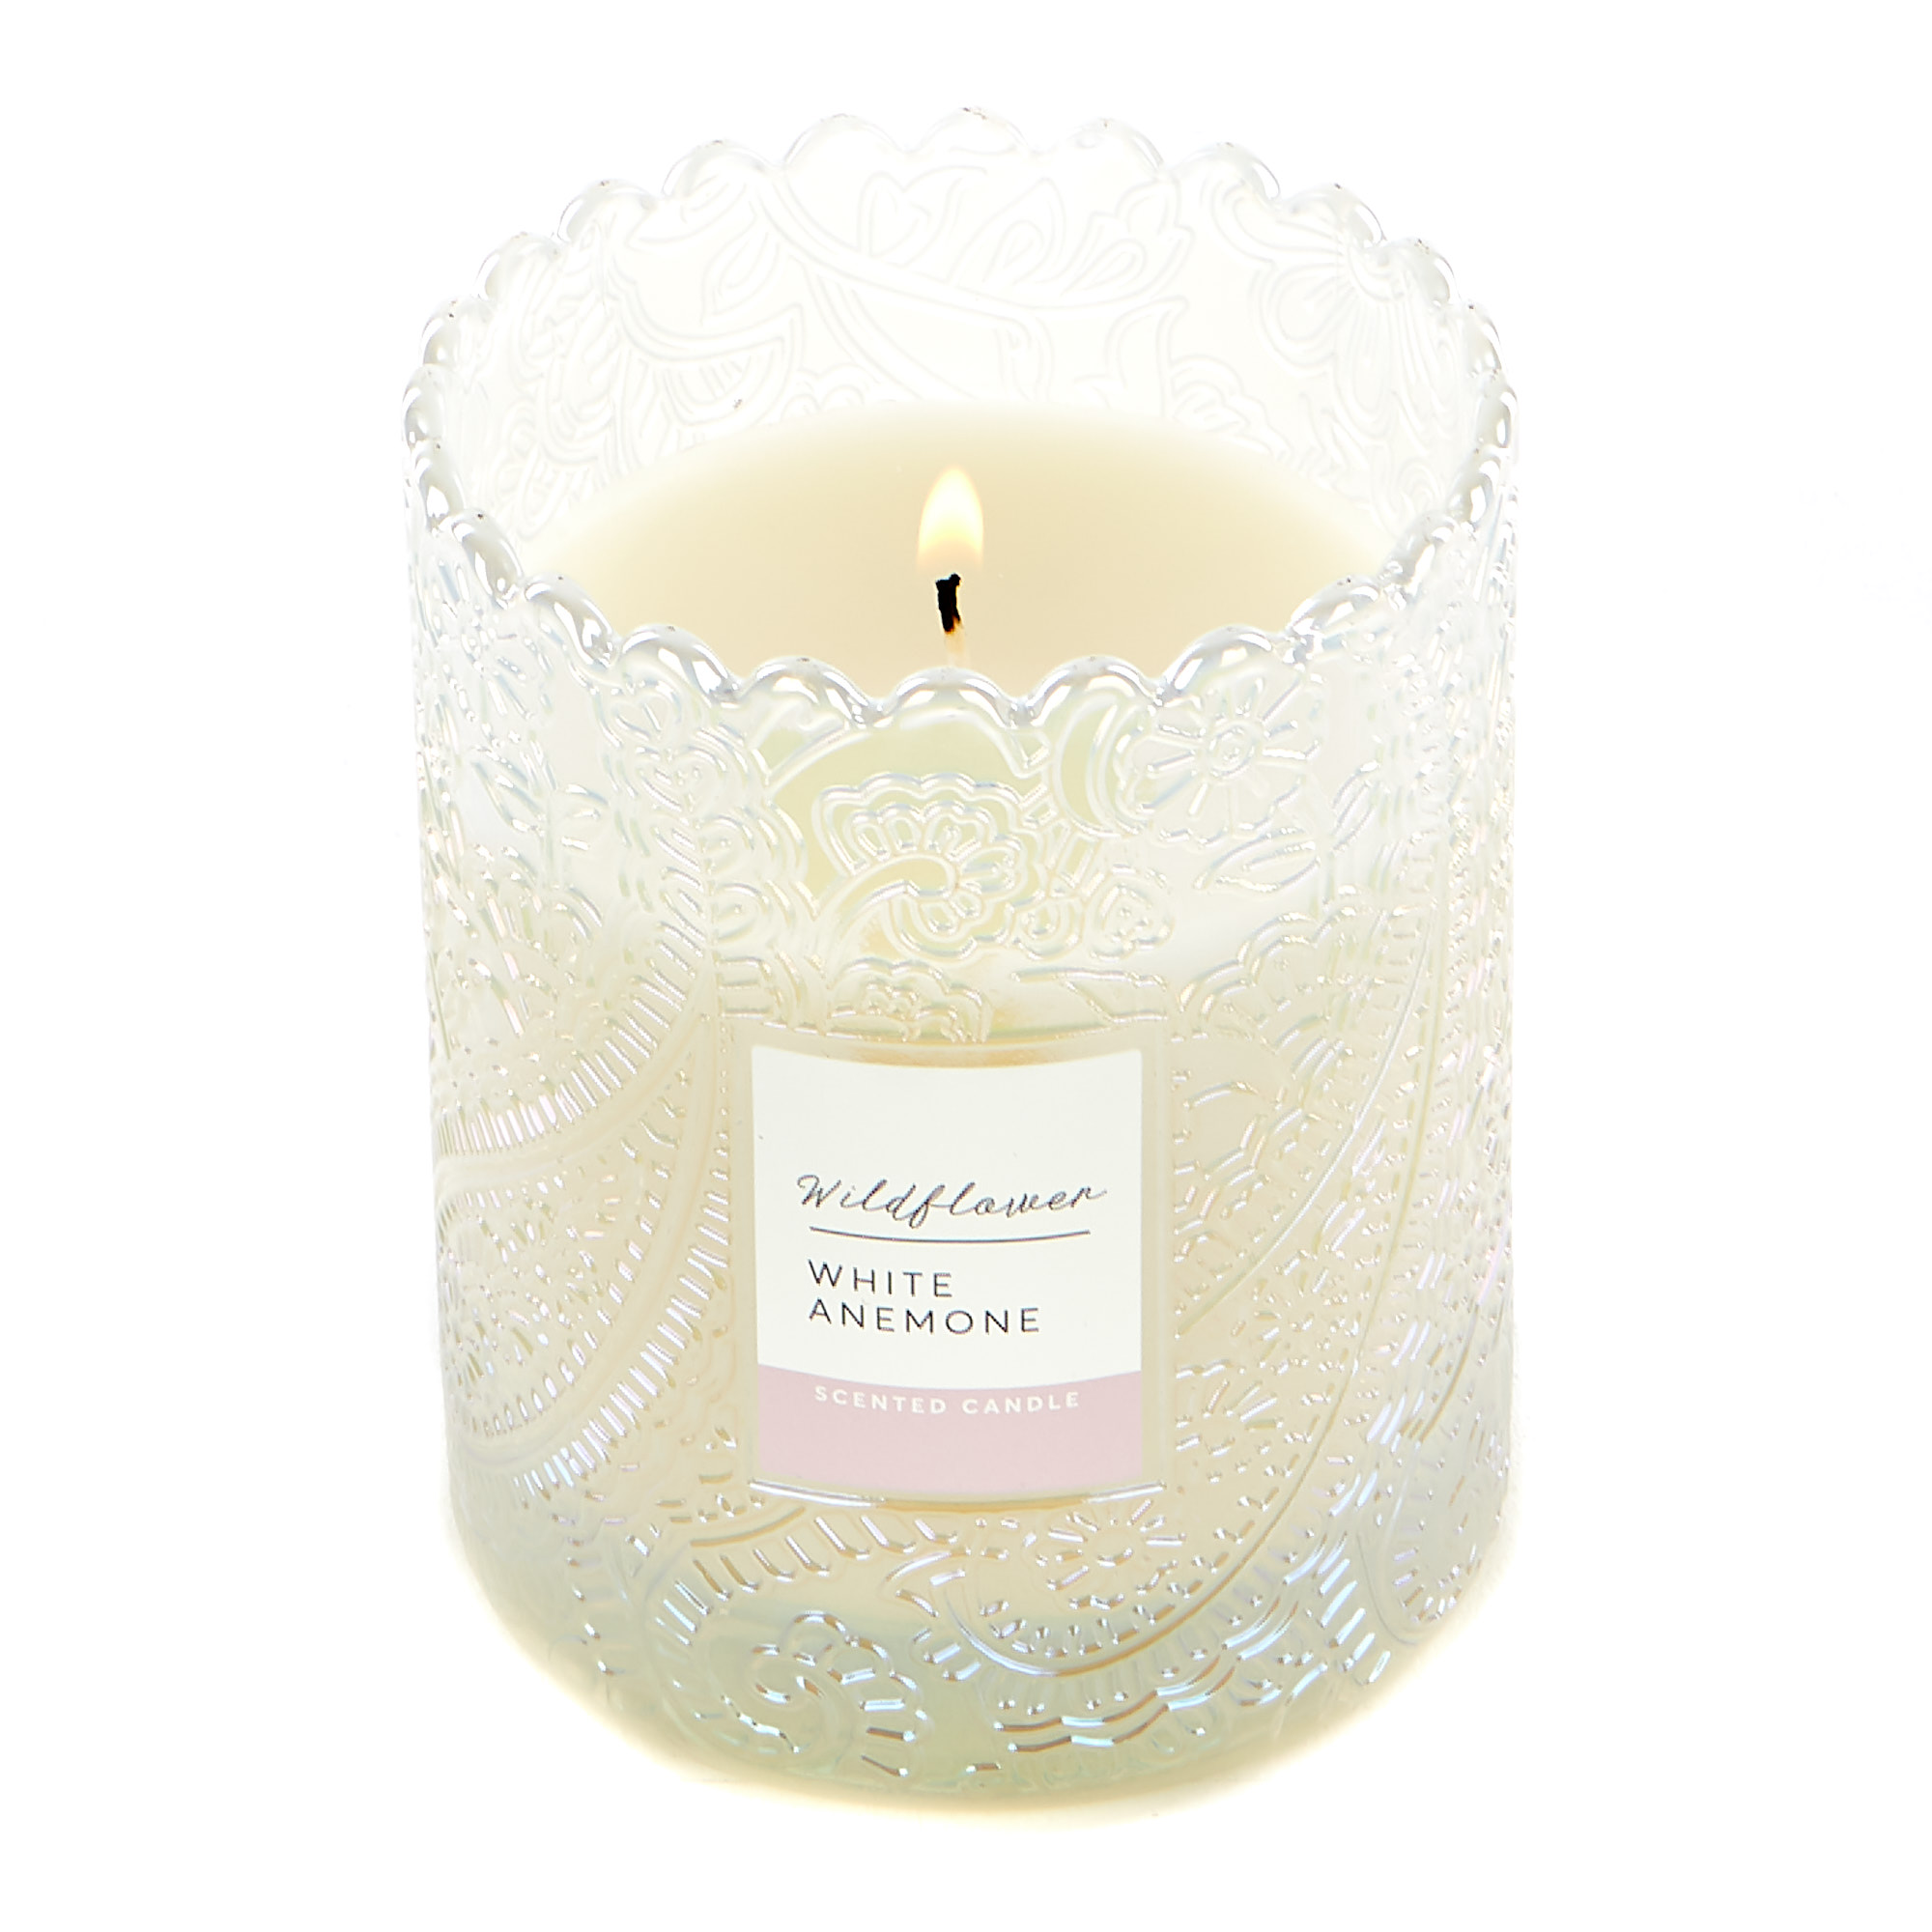 Wildflower White Anemone Scented Candle